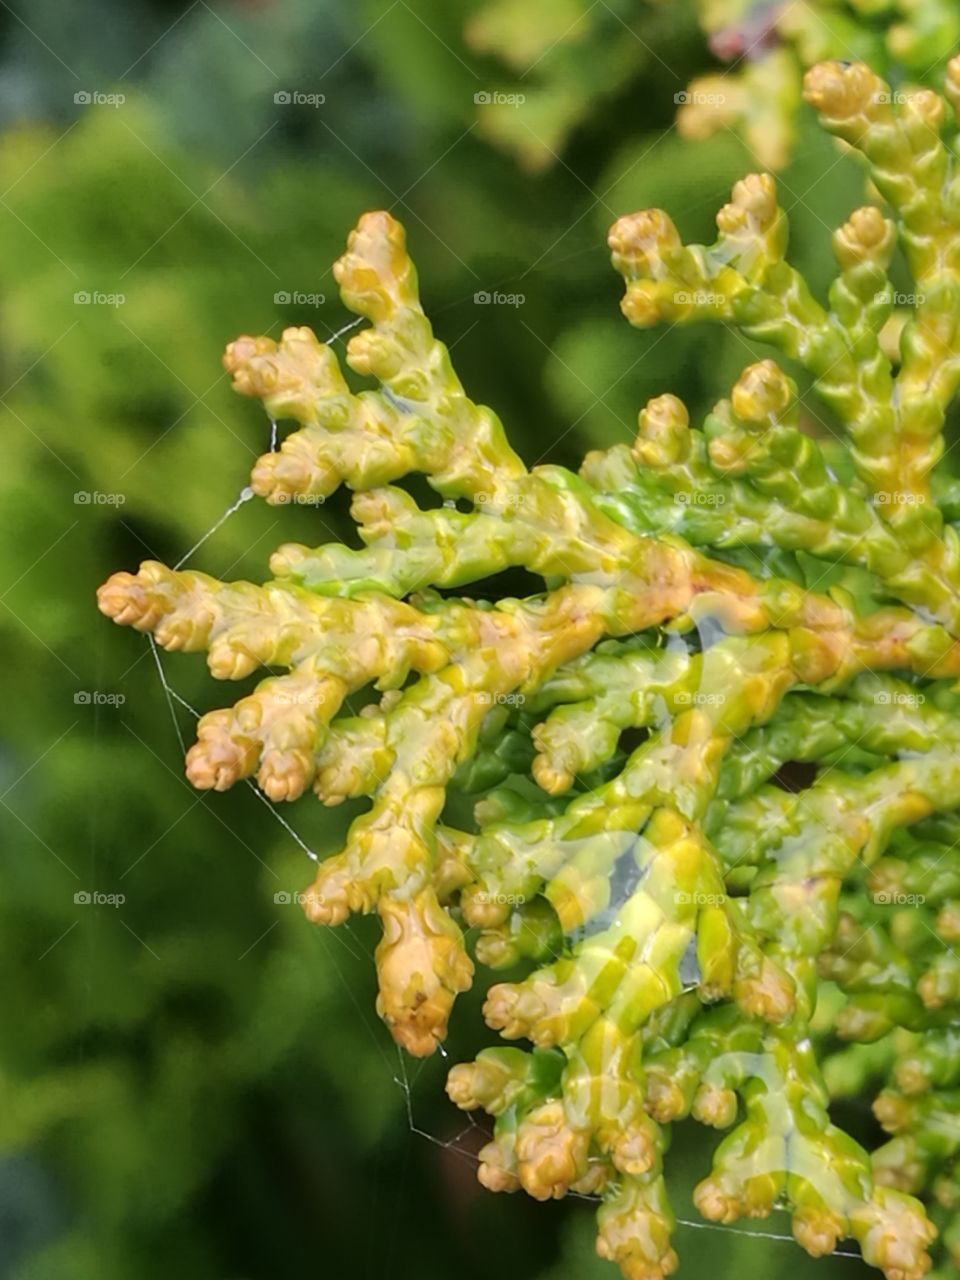 Wet Plant Covered In Webbing